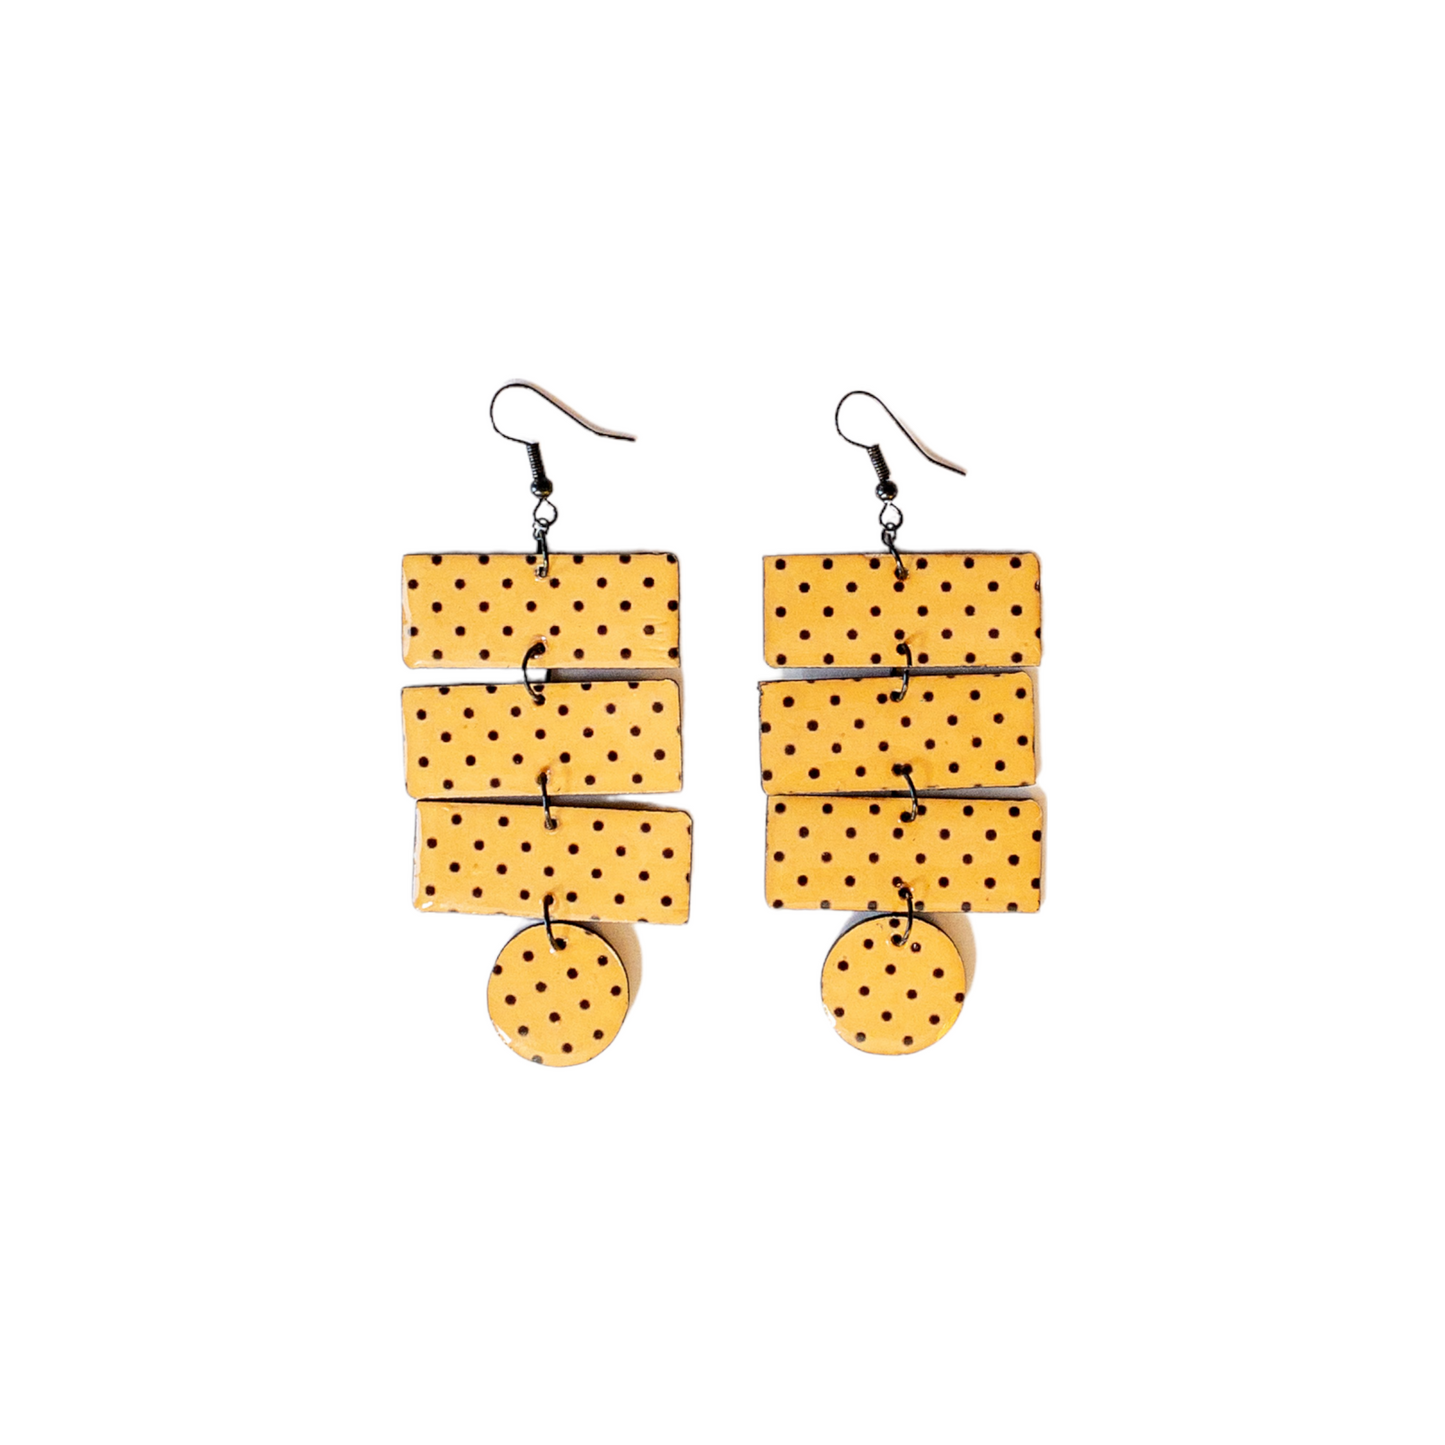 Marigold & Black Polka Dot Triple Rectangle with Circle Recycled Earrings